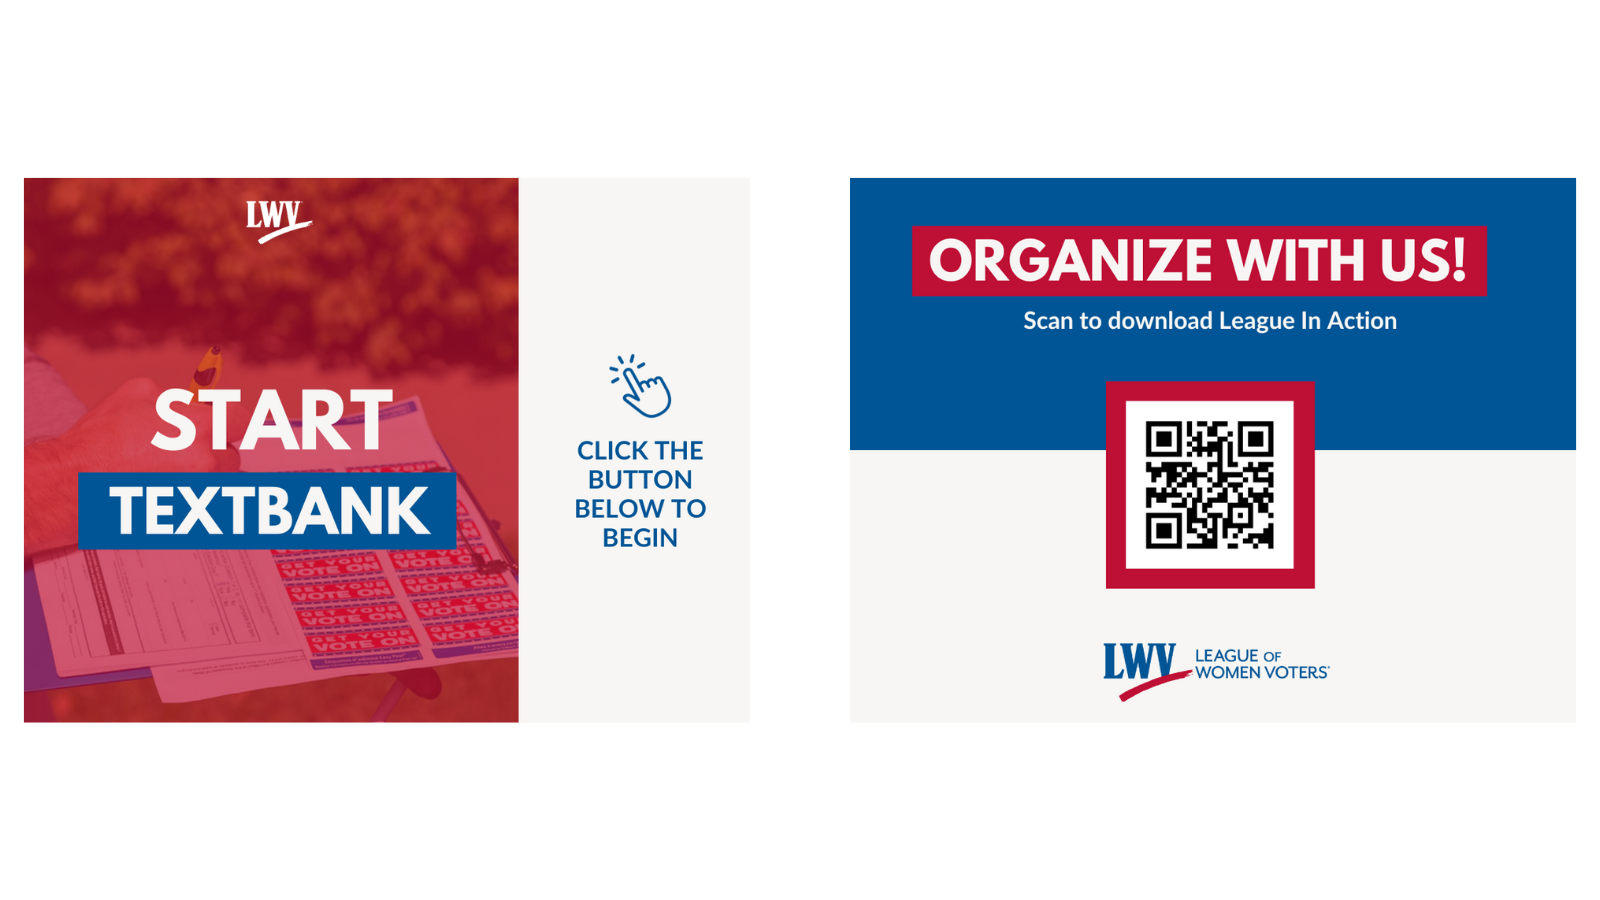 Two example League in Action graphics are featured - on the left, a red gradient over an image of someone filling out their voter registration form. The text over the image says START TEXTBANK. On the side in a white column, there is a finger pointing icon and text below that says: CLICK THE BUTTON BELOW TO BEGIN. The graphic on the right is half blue half white, split horizontally in the middle. The top says "ORGANIZE WITH US" then underneath, "Scan to download League in Action." A QR code is in a red box.